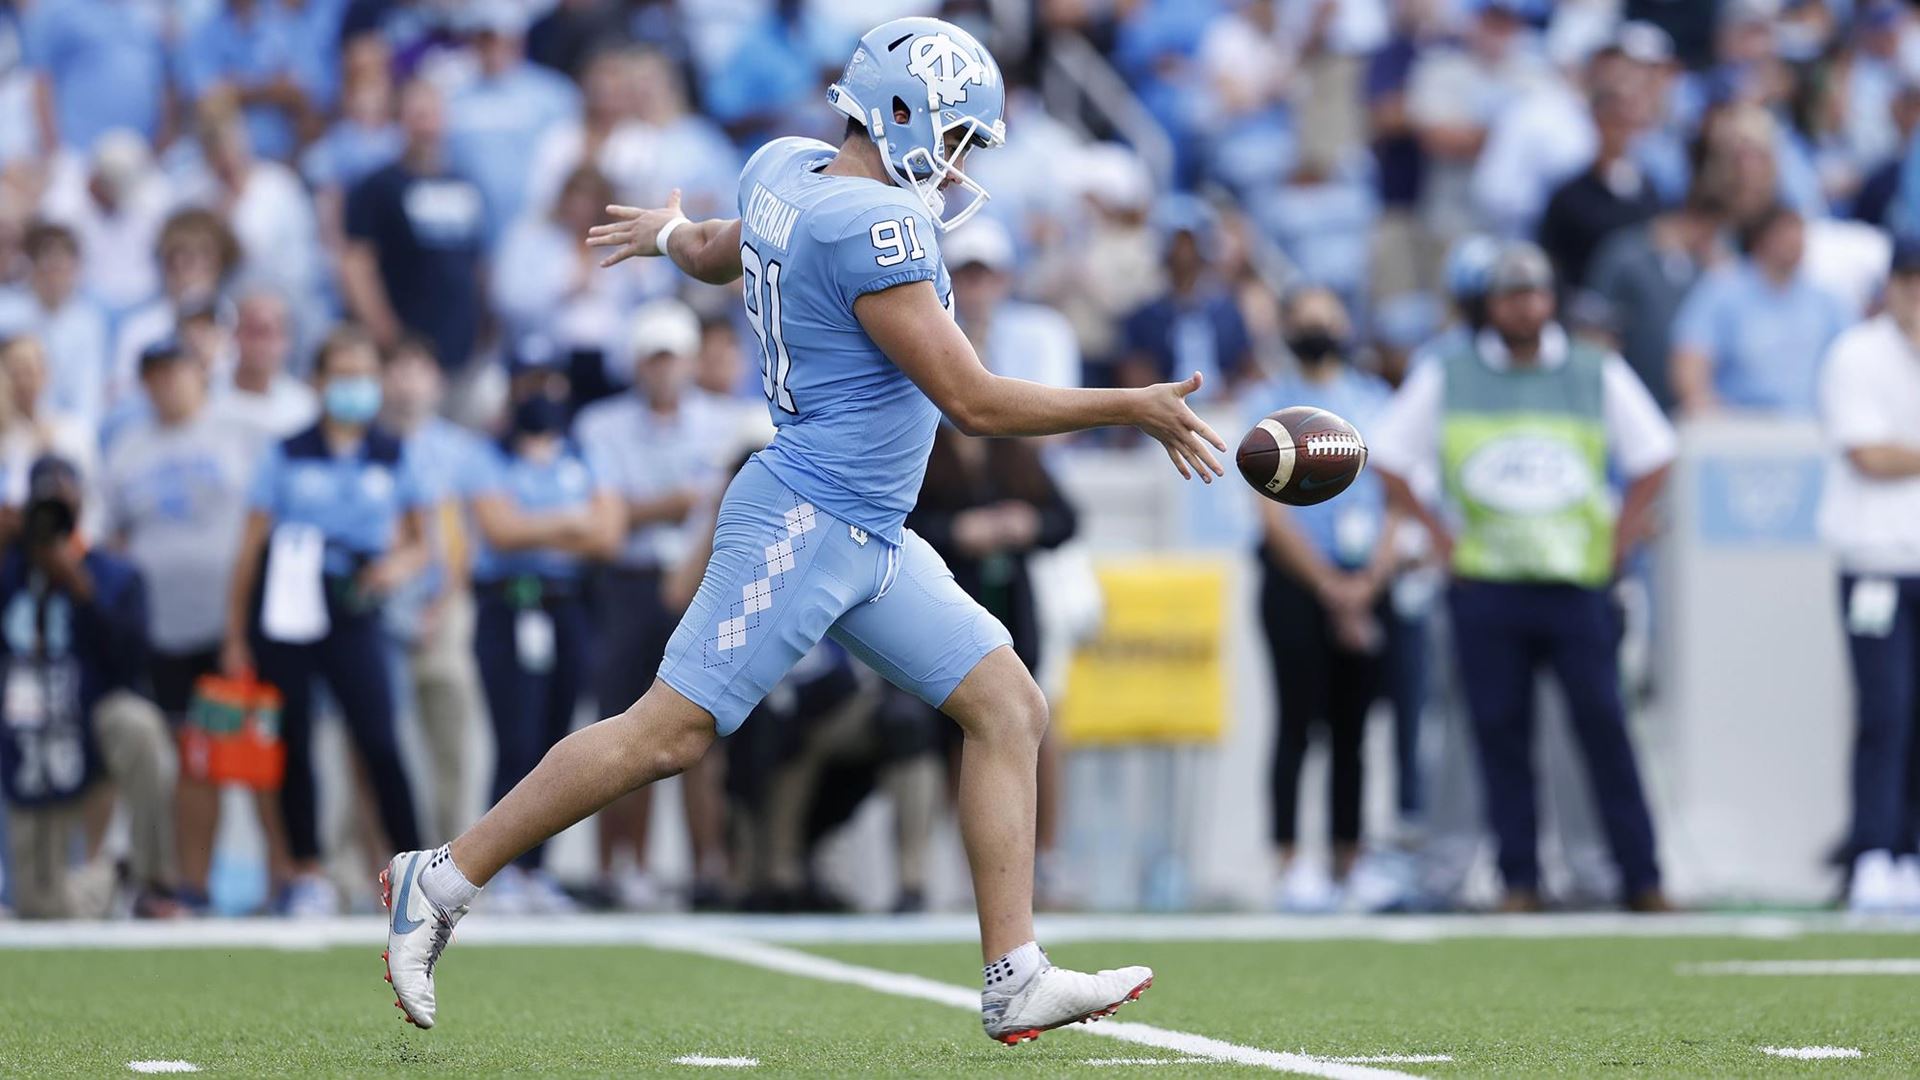 Video: Top 5 Returning Kickers & Punters In The ACC